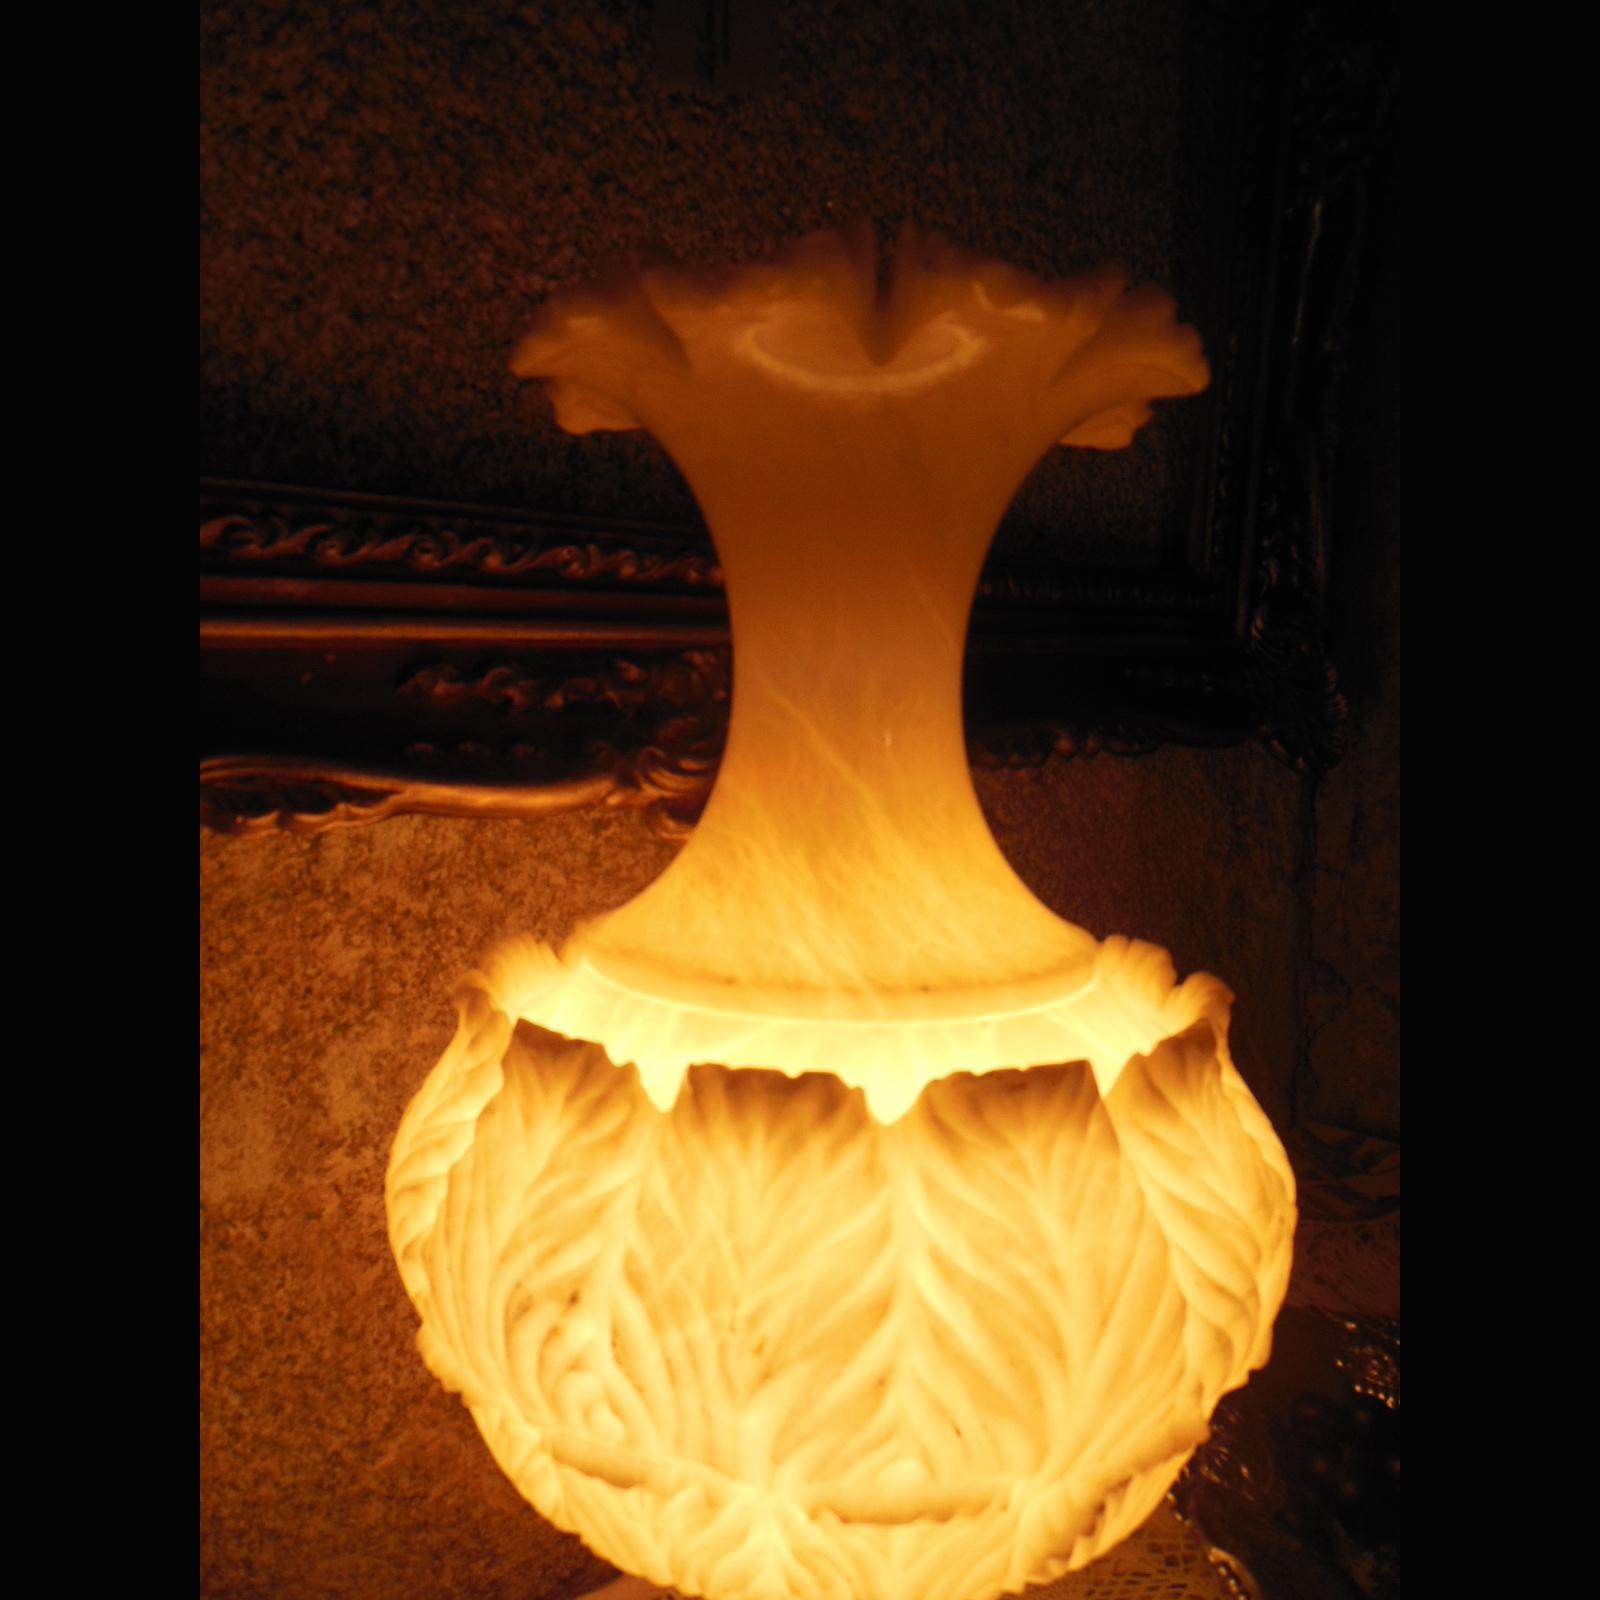 Italian white alabaster carved table lamp with interior lighting
First half of the 20th century, Italy.

This alabaster lamp carved in the shape of a vase with acanthus leaves has an elegant classical vase shape. 

Due to its sculptural shape and